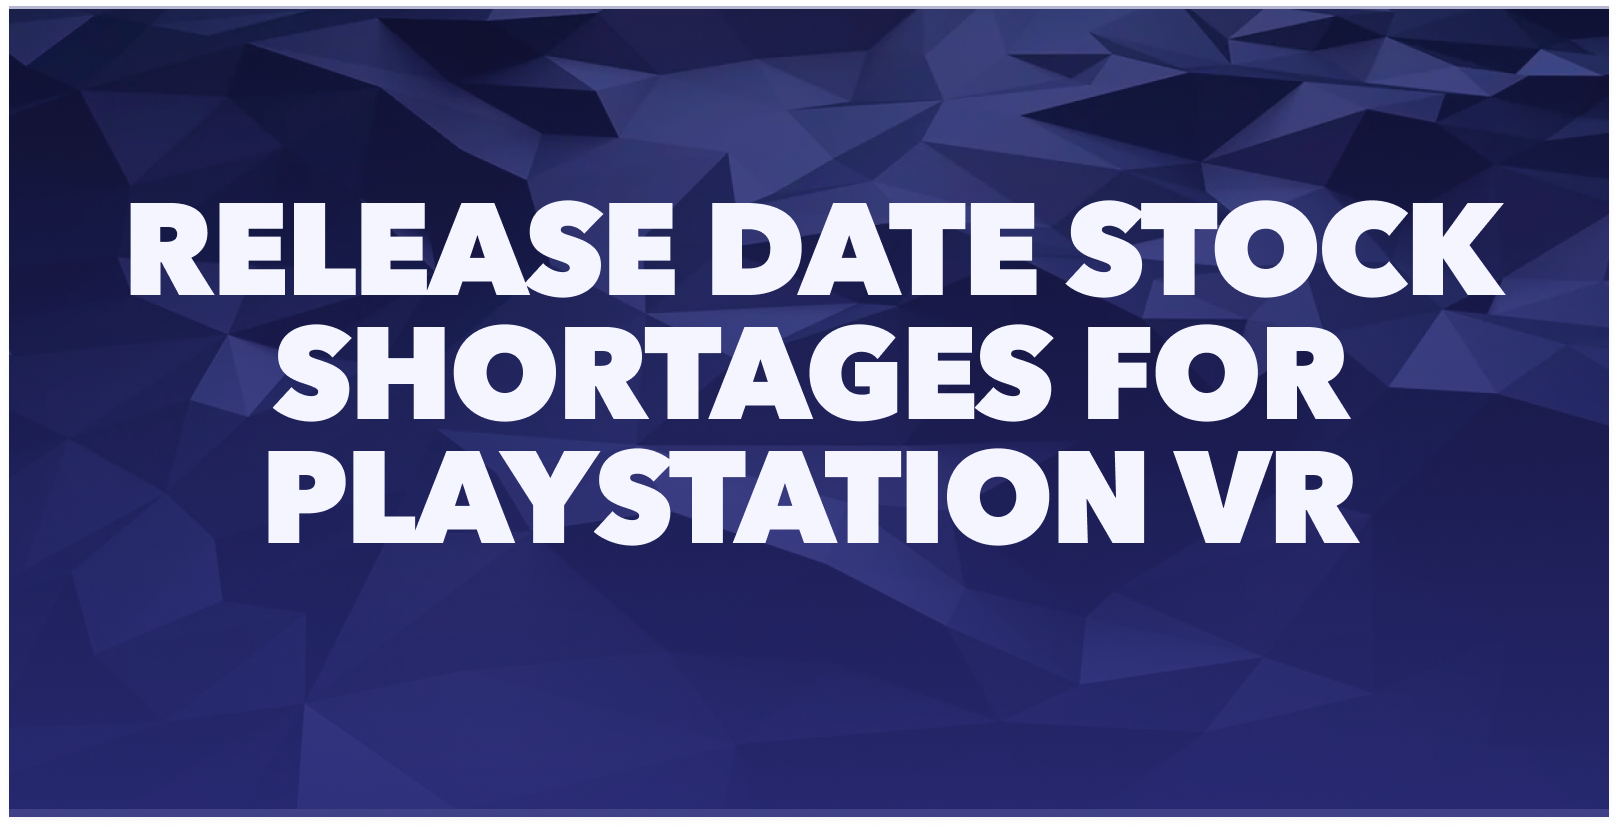 Release date stock shortages for PlayStation VR Graphic